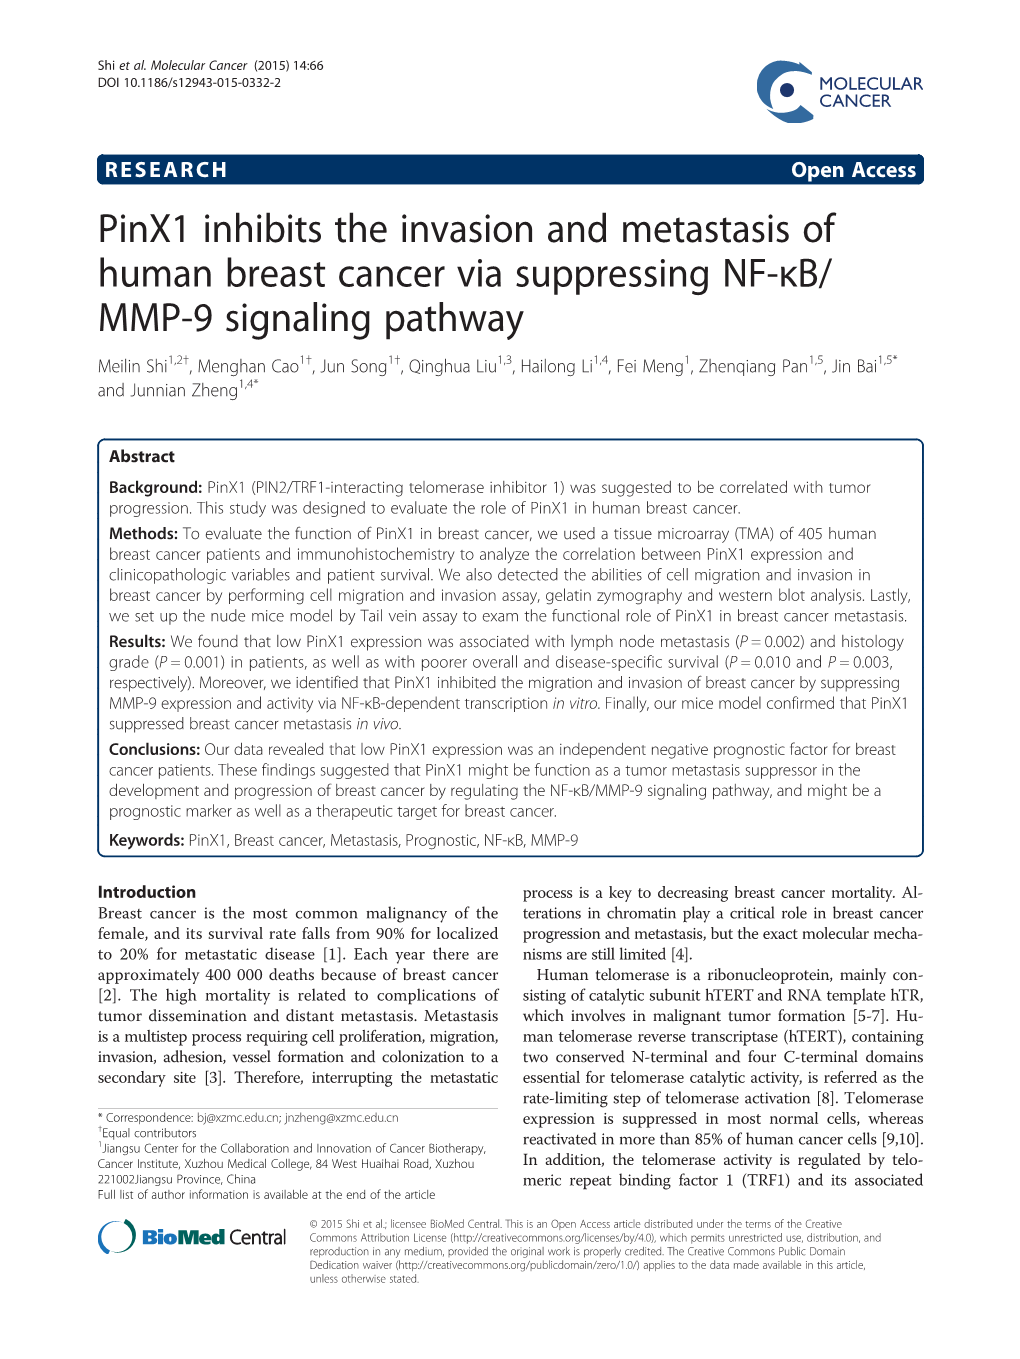 Pinx1 Inhibits the Invasion and Metastasis Of